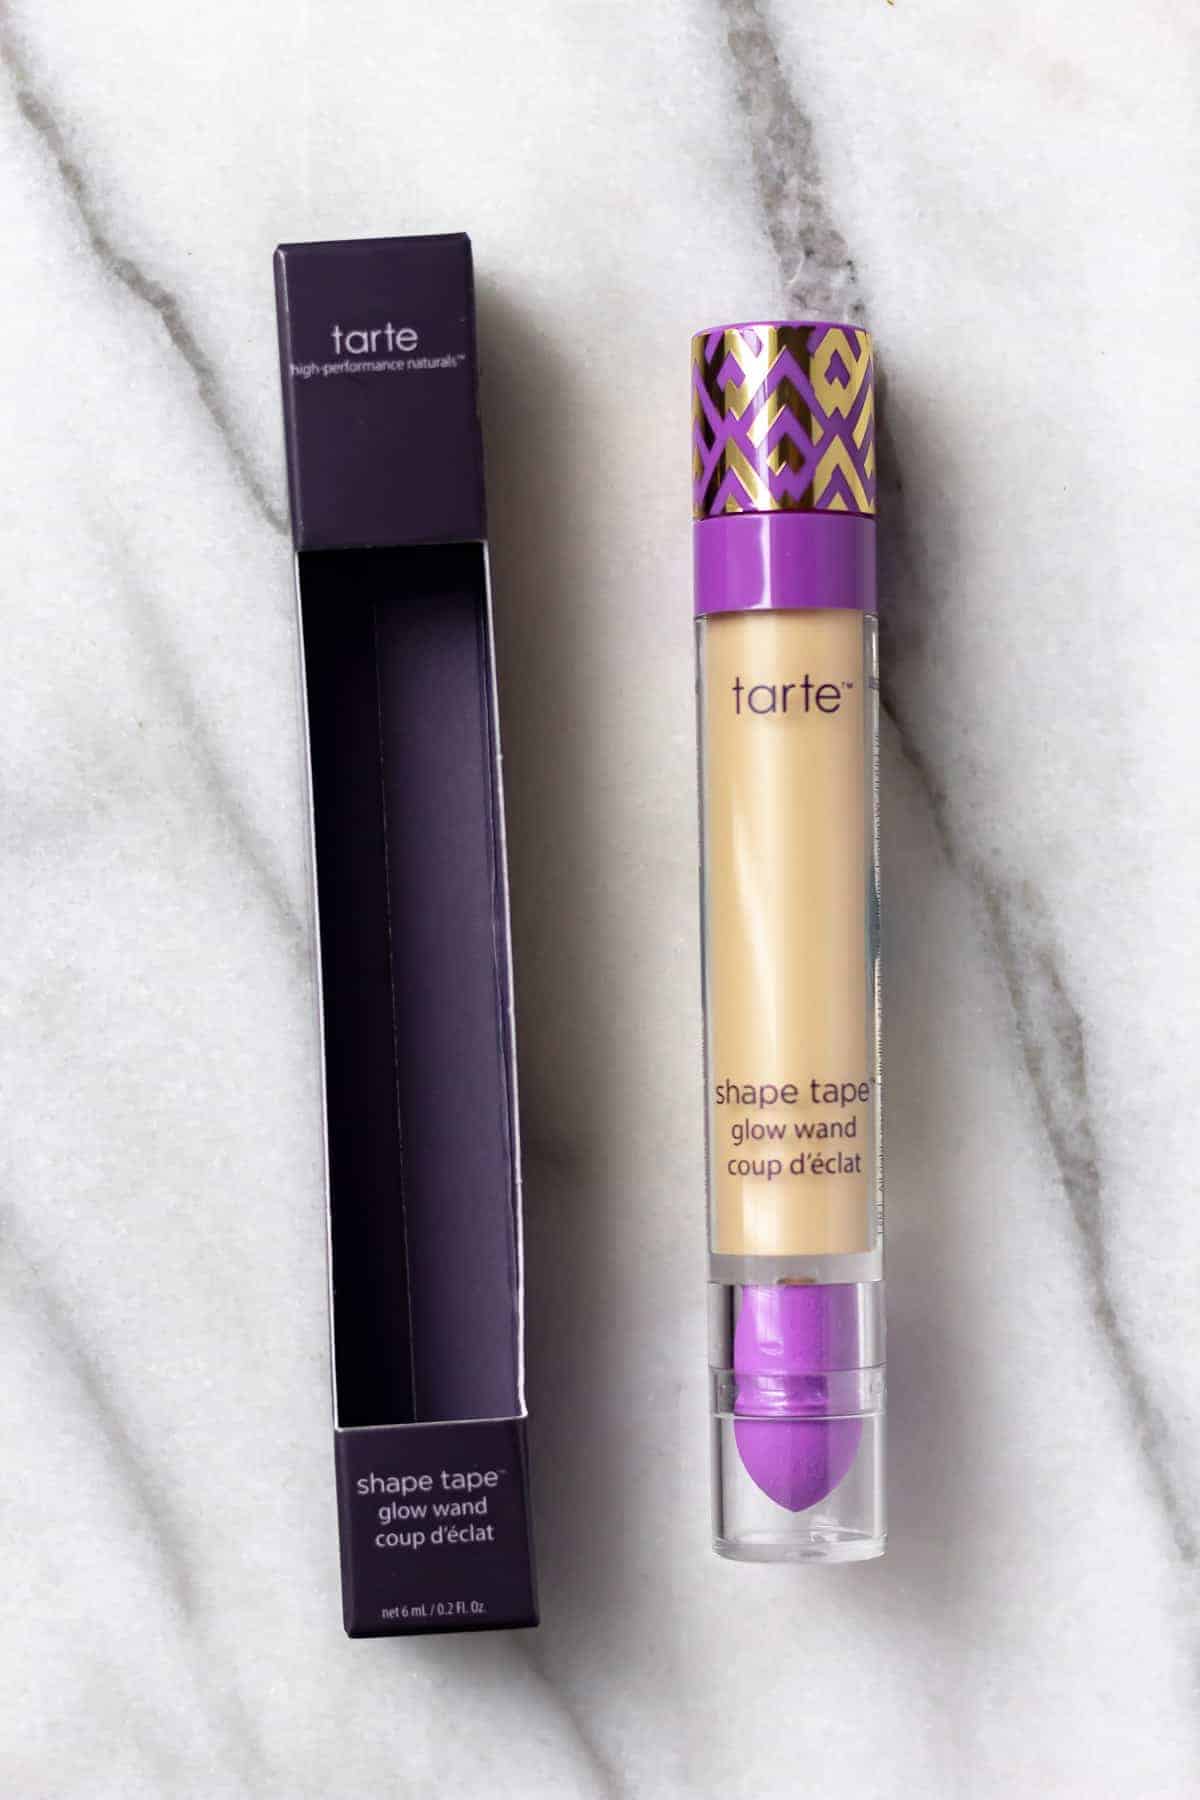 Tarte Shape Tape Glow Wand in Sunbeam and box on a marble background